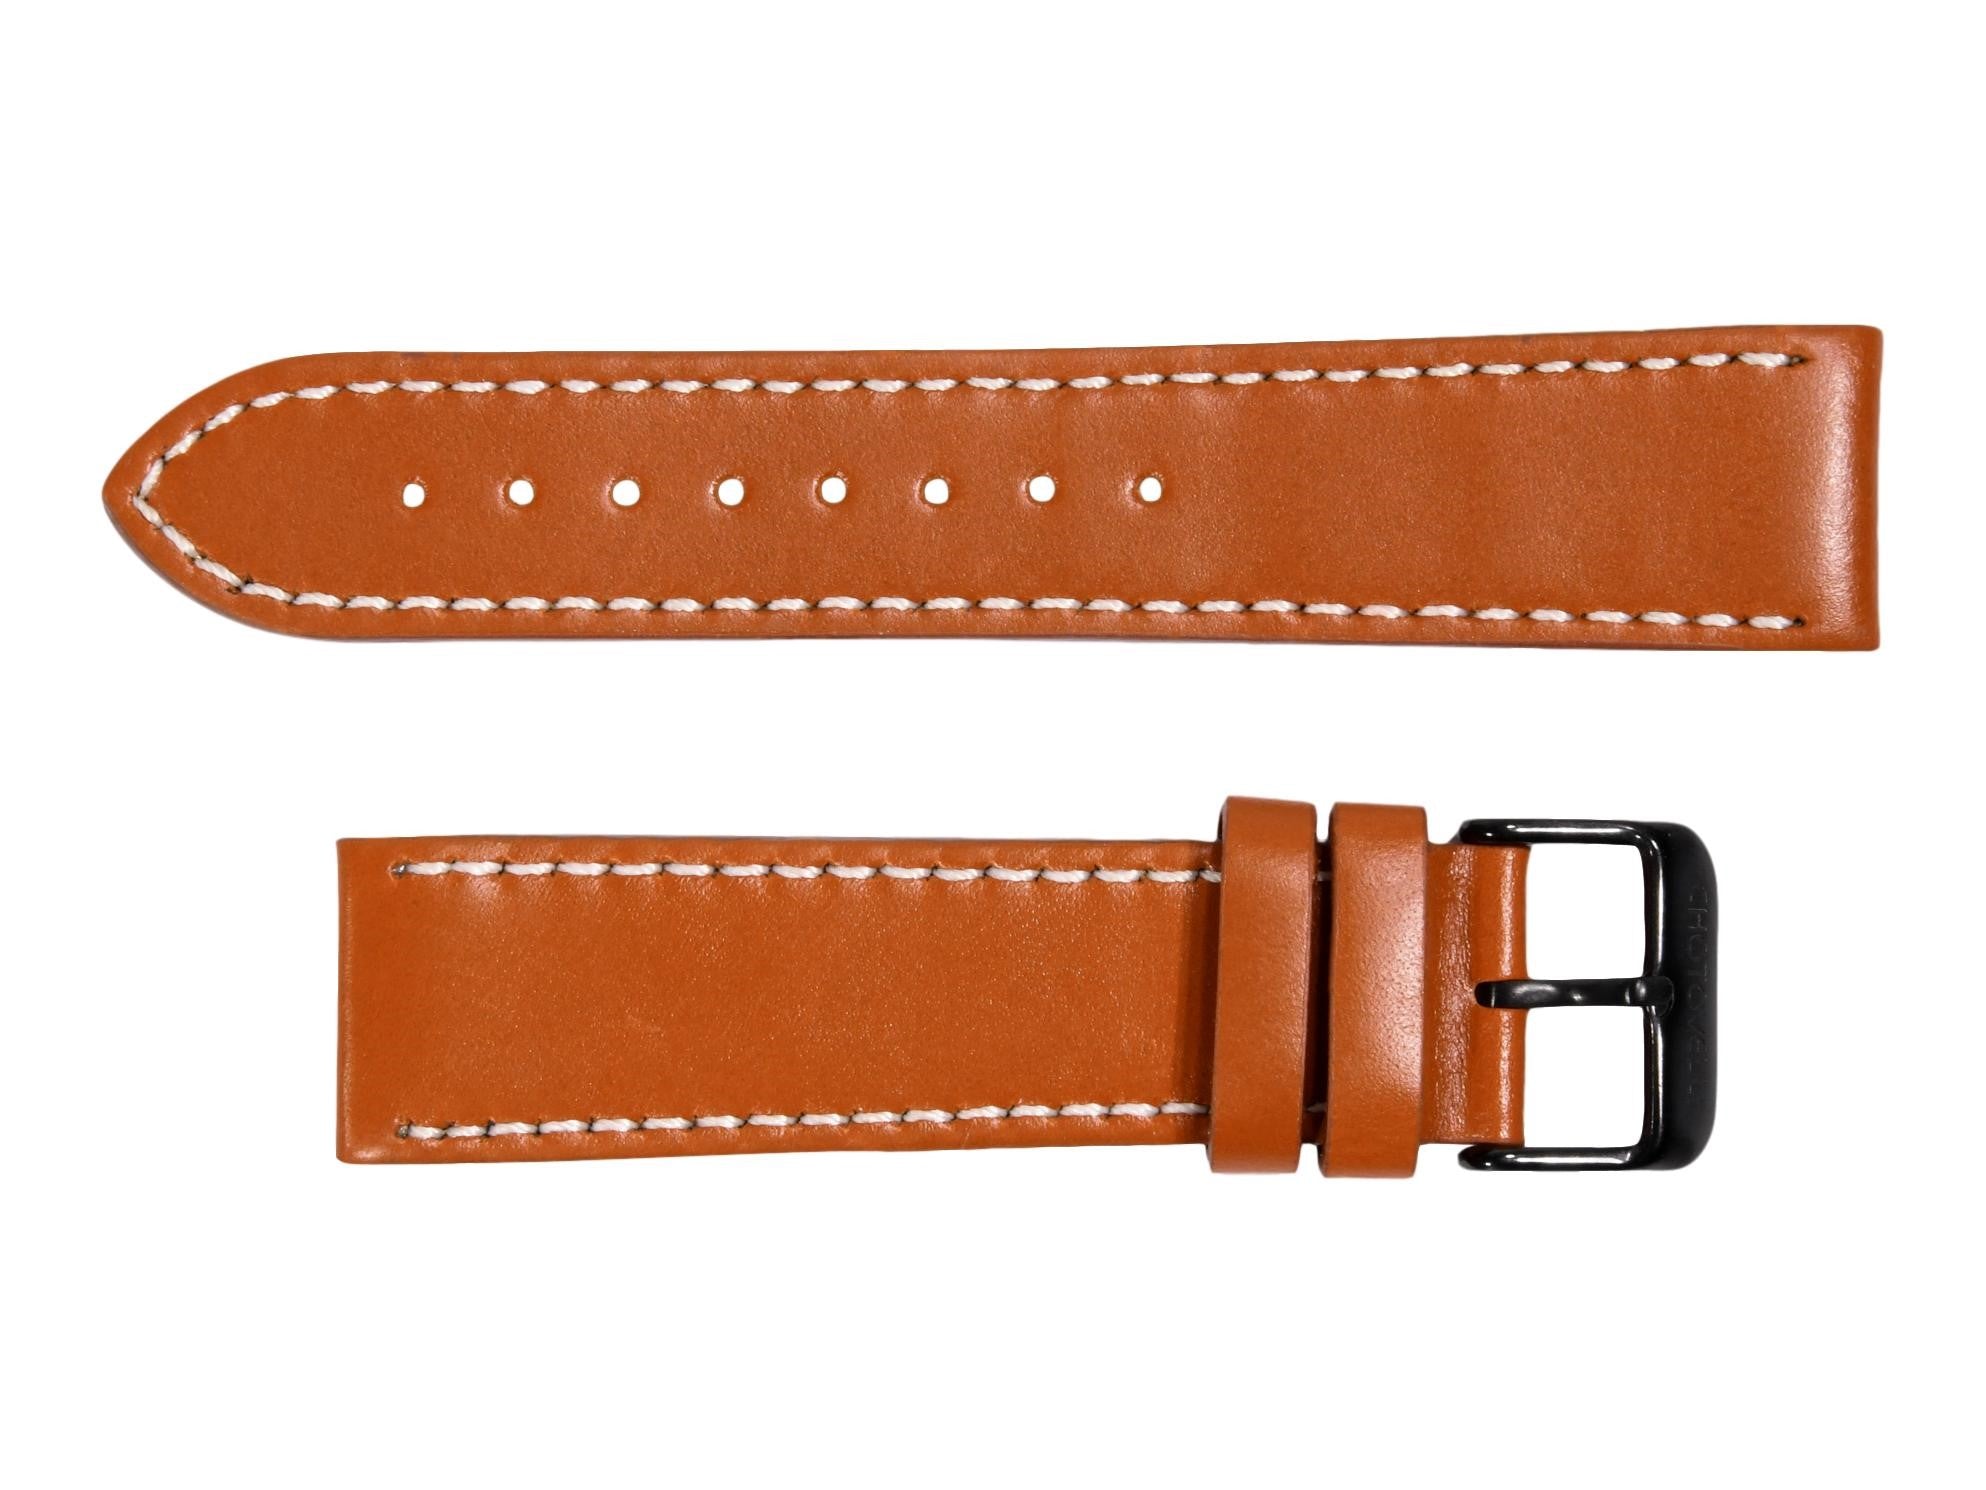 Togo Cognac Brown Tonal Leather Watch Strap